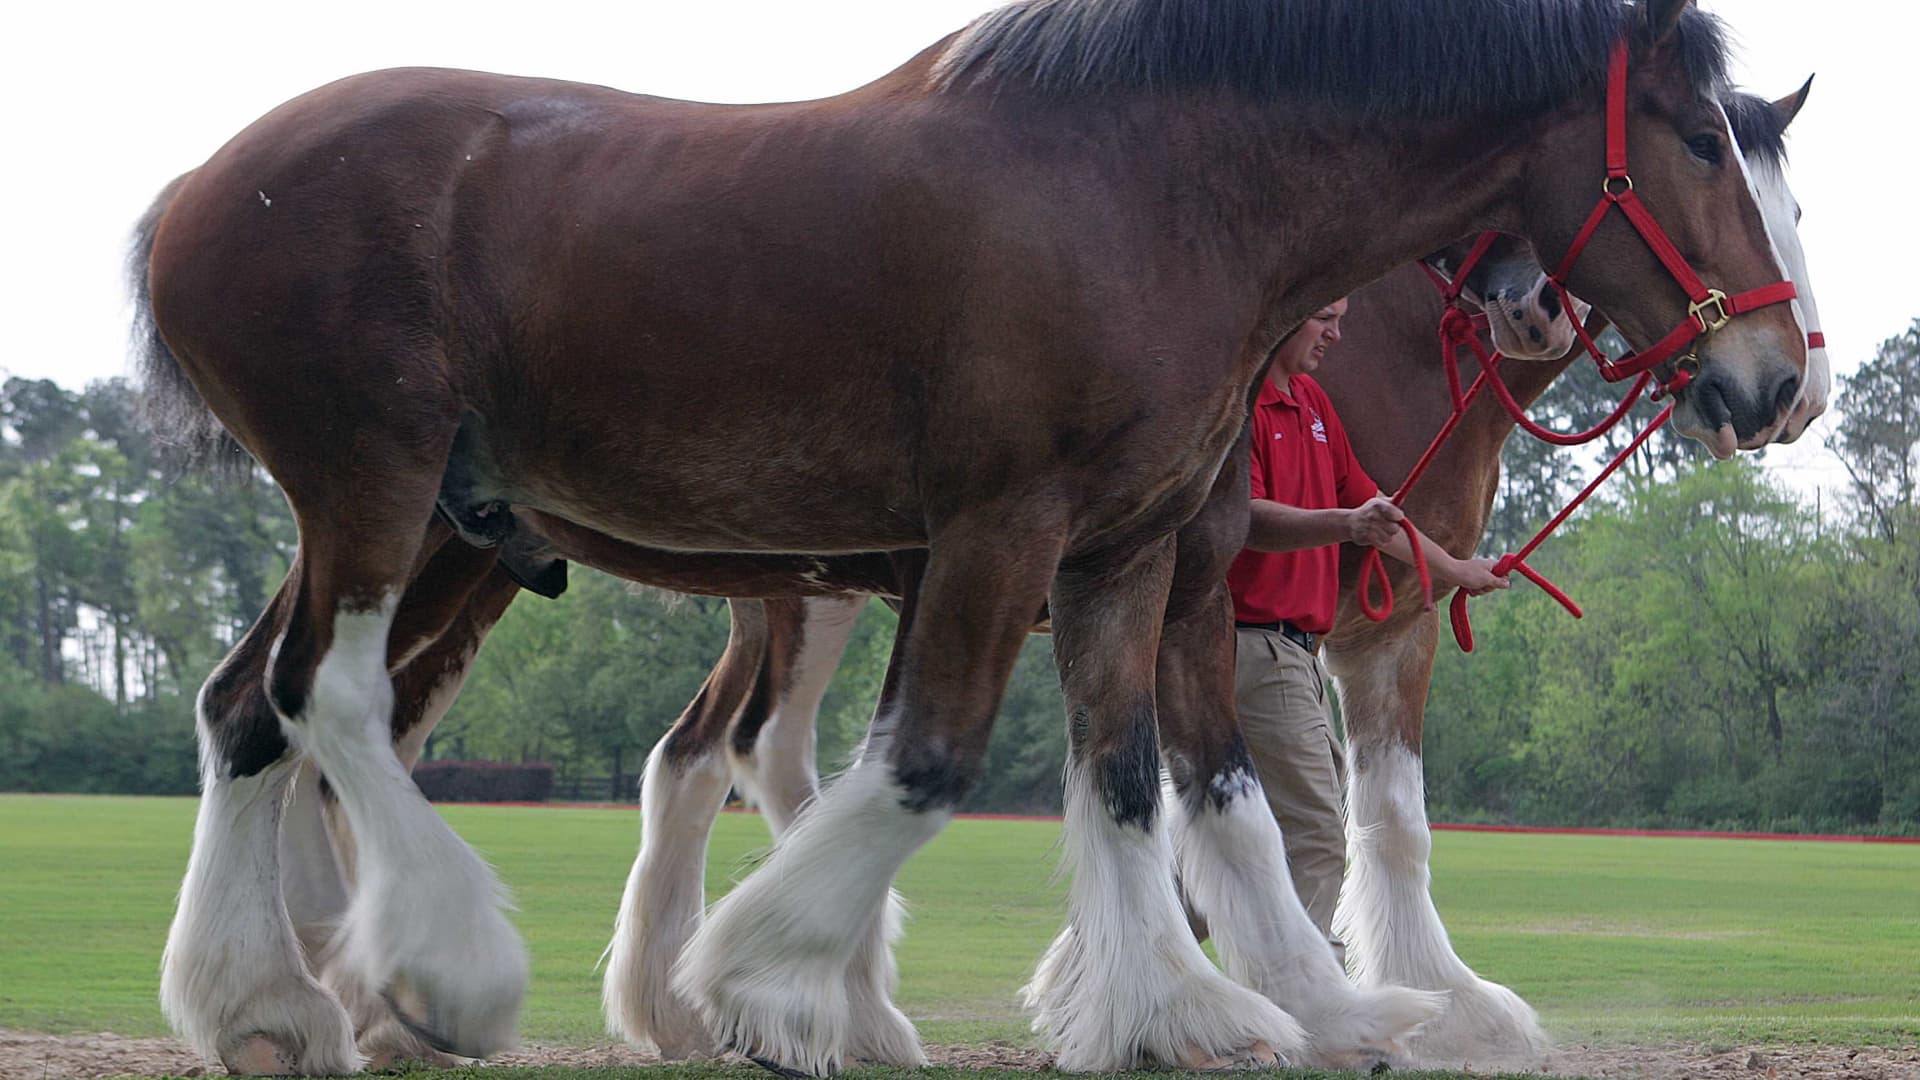 Anheuser-Busch to stop cutting off Clydesdale horse tails